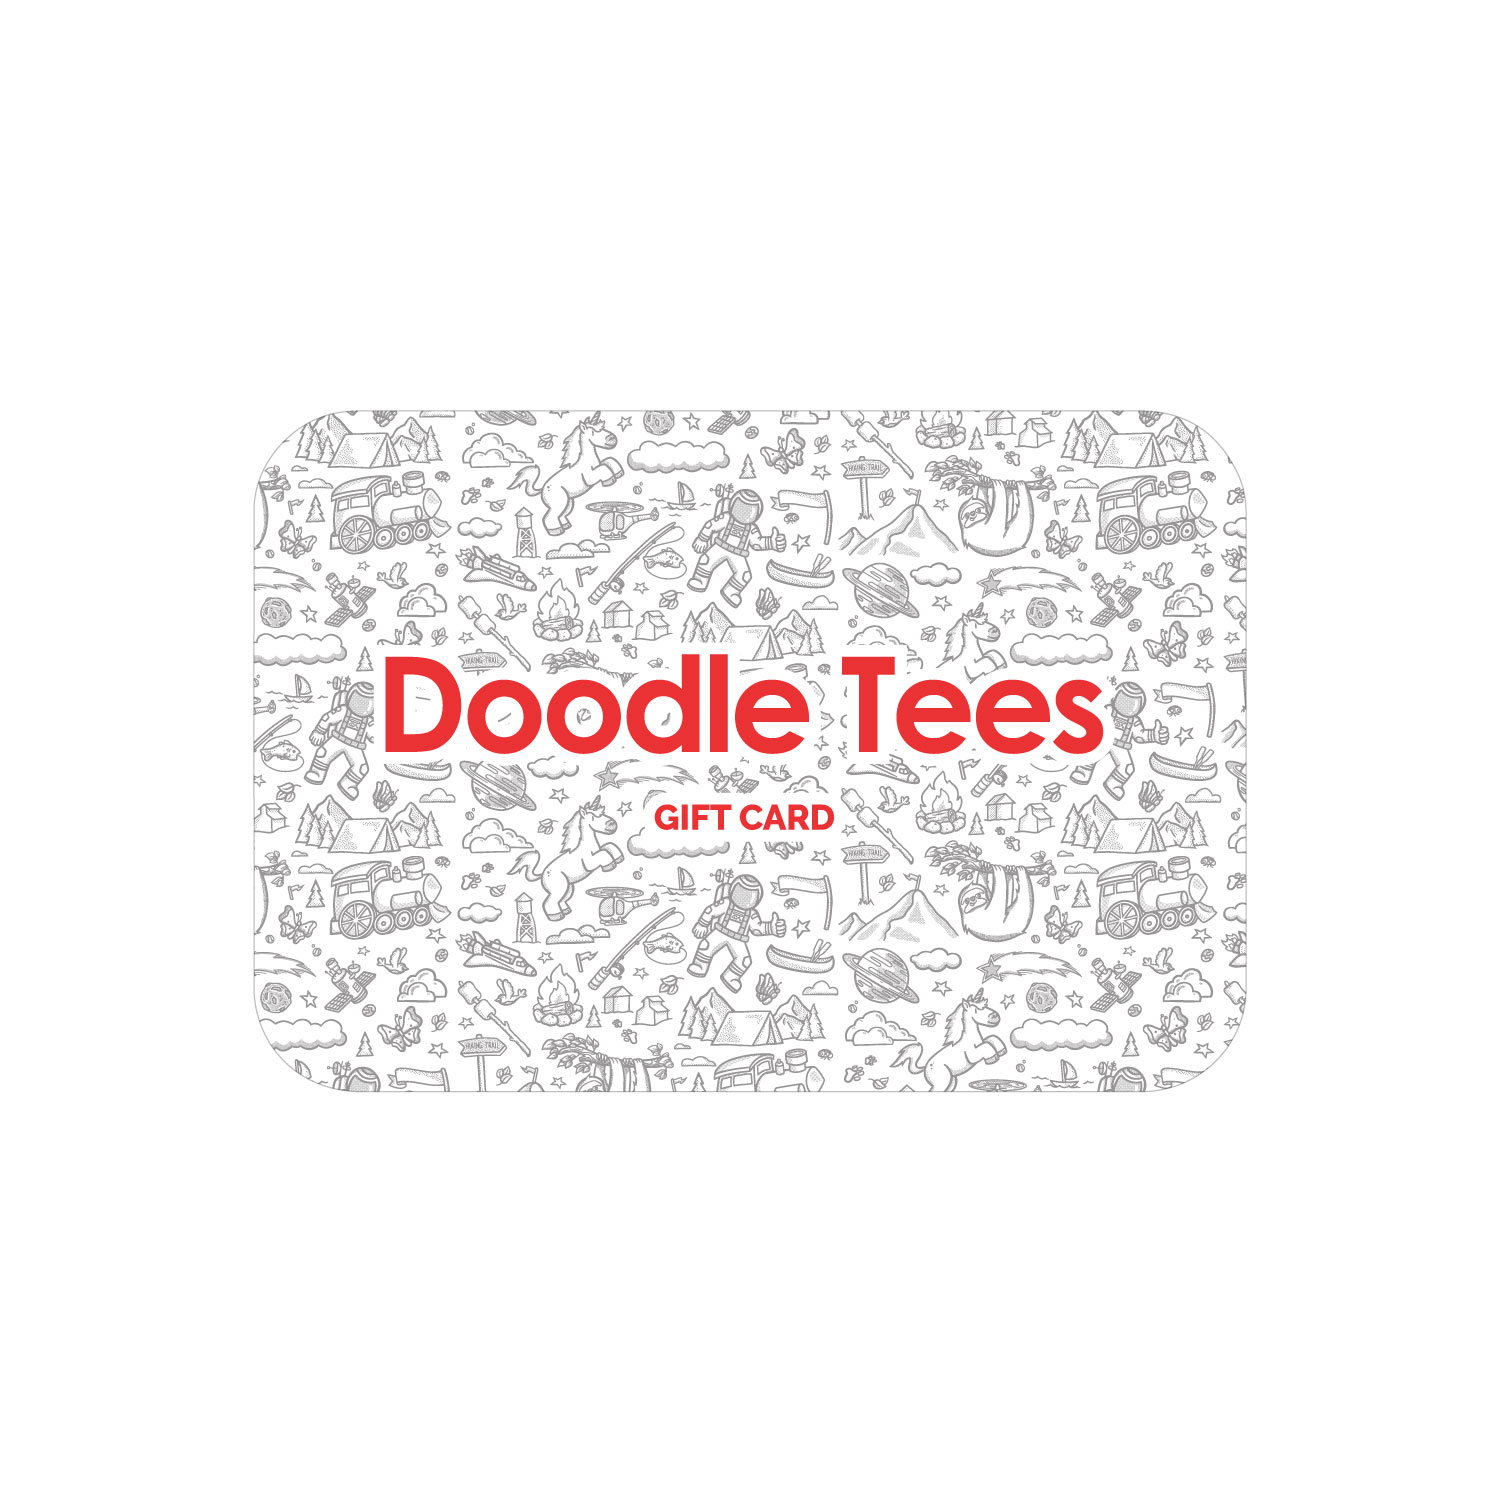 "Doodle tees grift card photo image with red lettering and a background with tiny design elements"